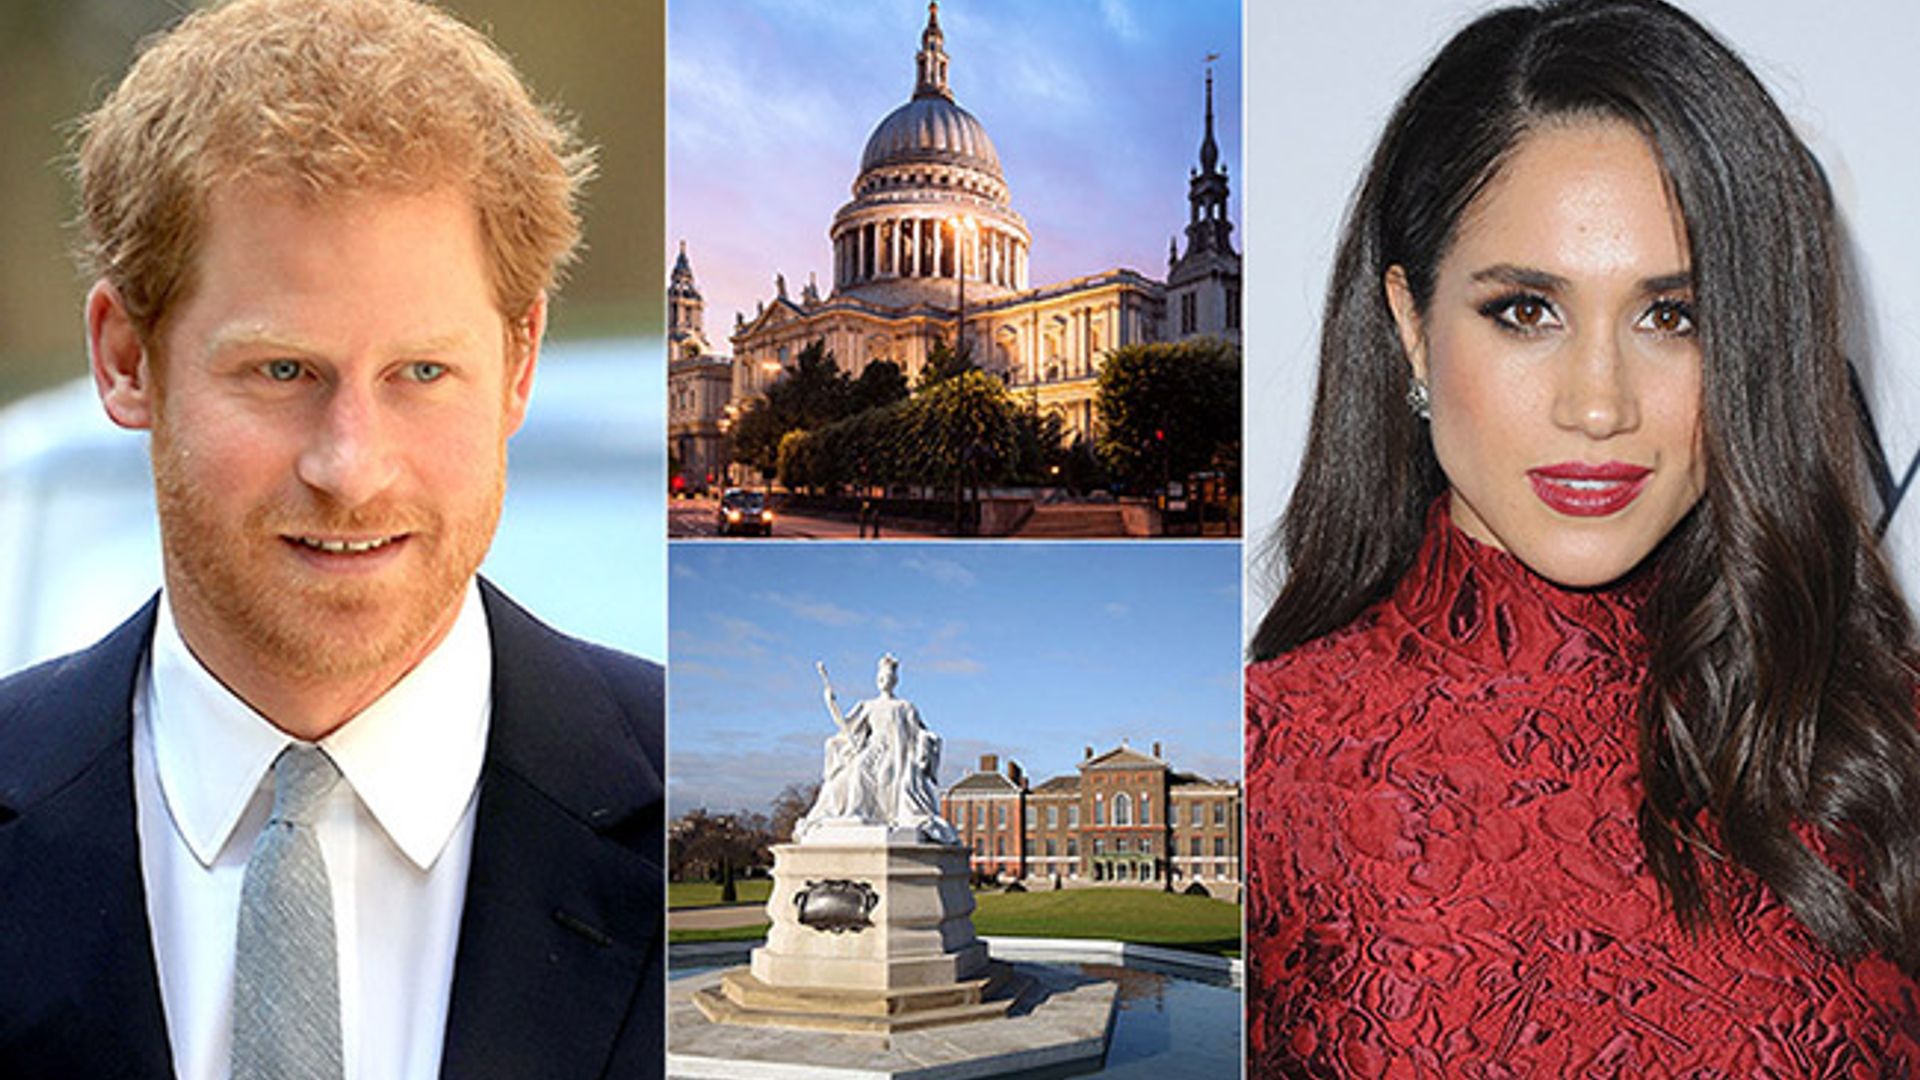 Prince Harry and Meghan Markle engagement: 7 burning questions answered